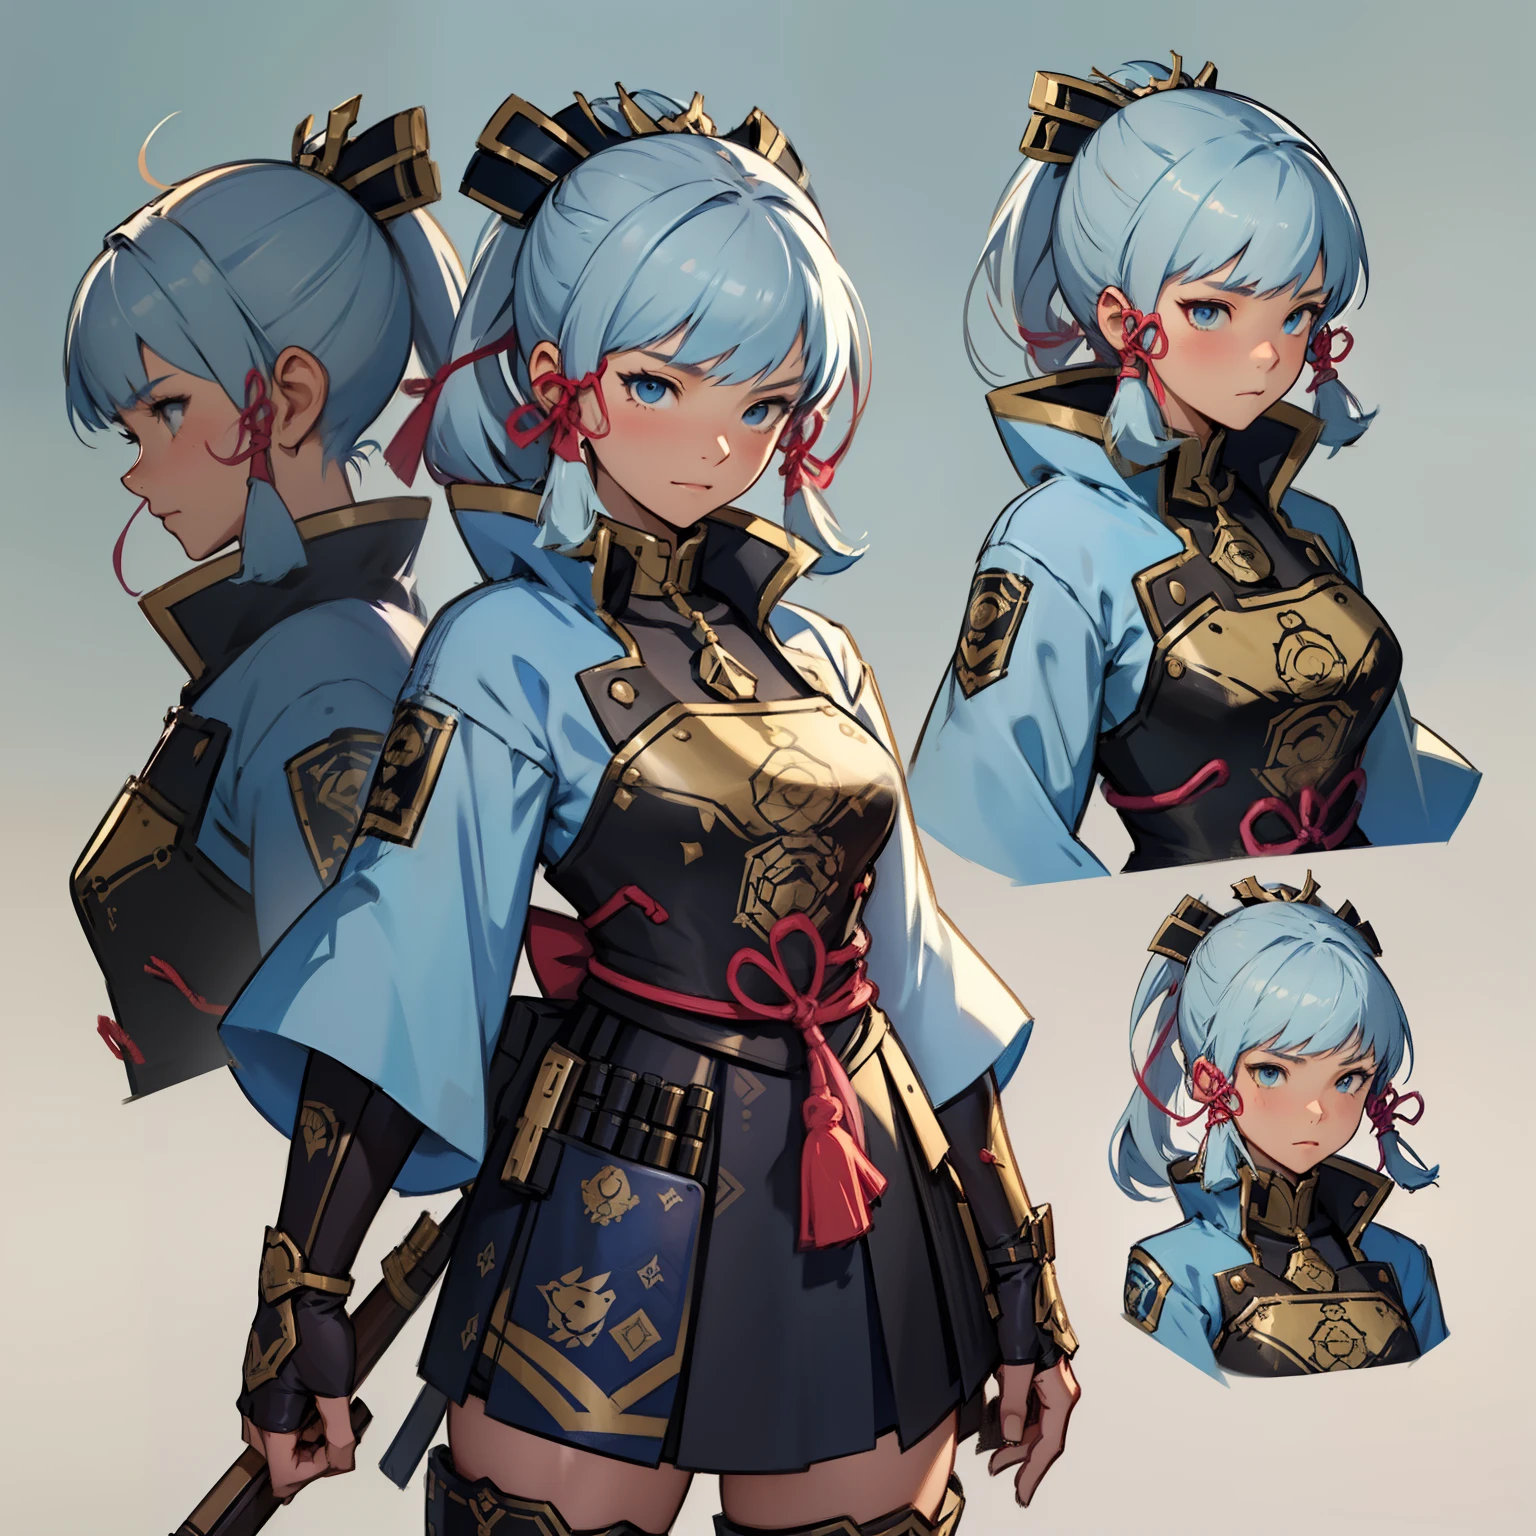 kamisato_ayaka, Close-up of a young woman holding a big bow, ((Character concept art)), ((Character design sheet, Same character..., Front, side, back)) Maple Story Character Art, Video Game Character Design, Video Game Character Design, Maple Girl Gun Story, Highly detailed concept art from experts